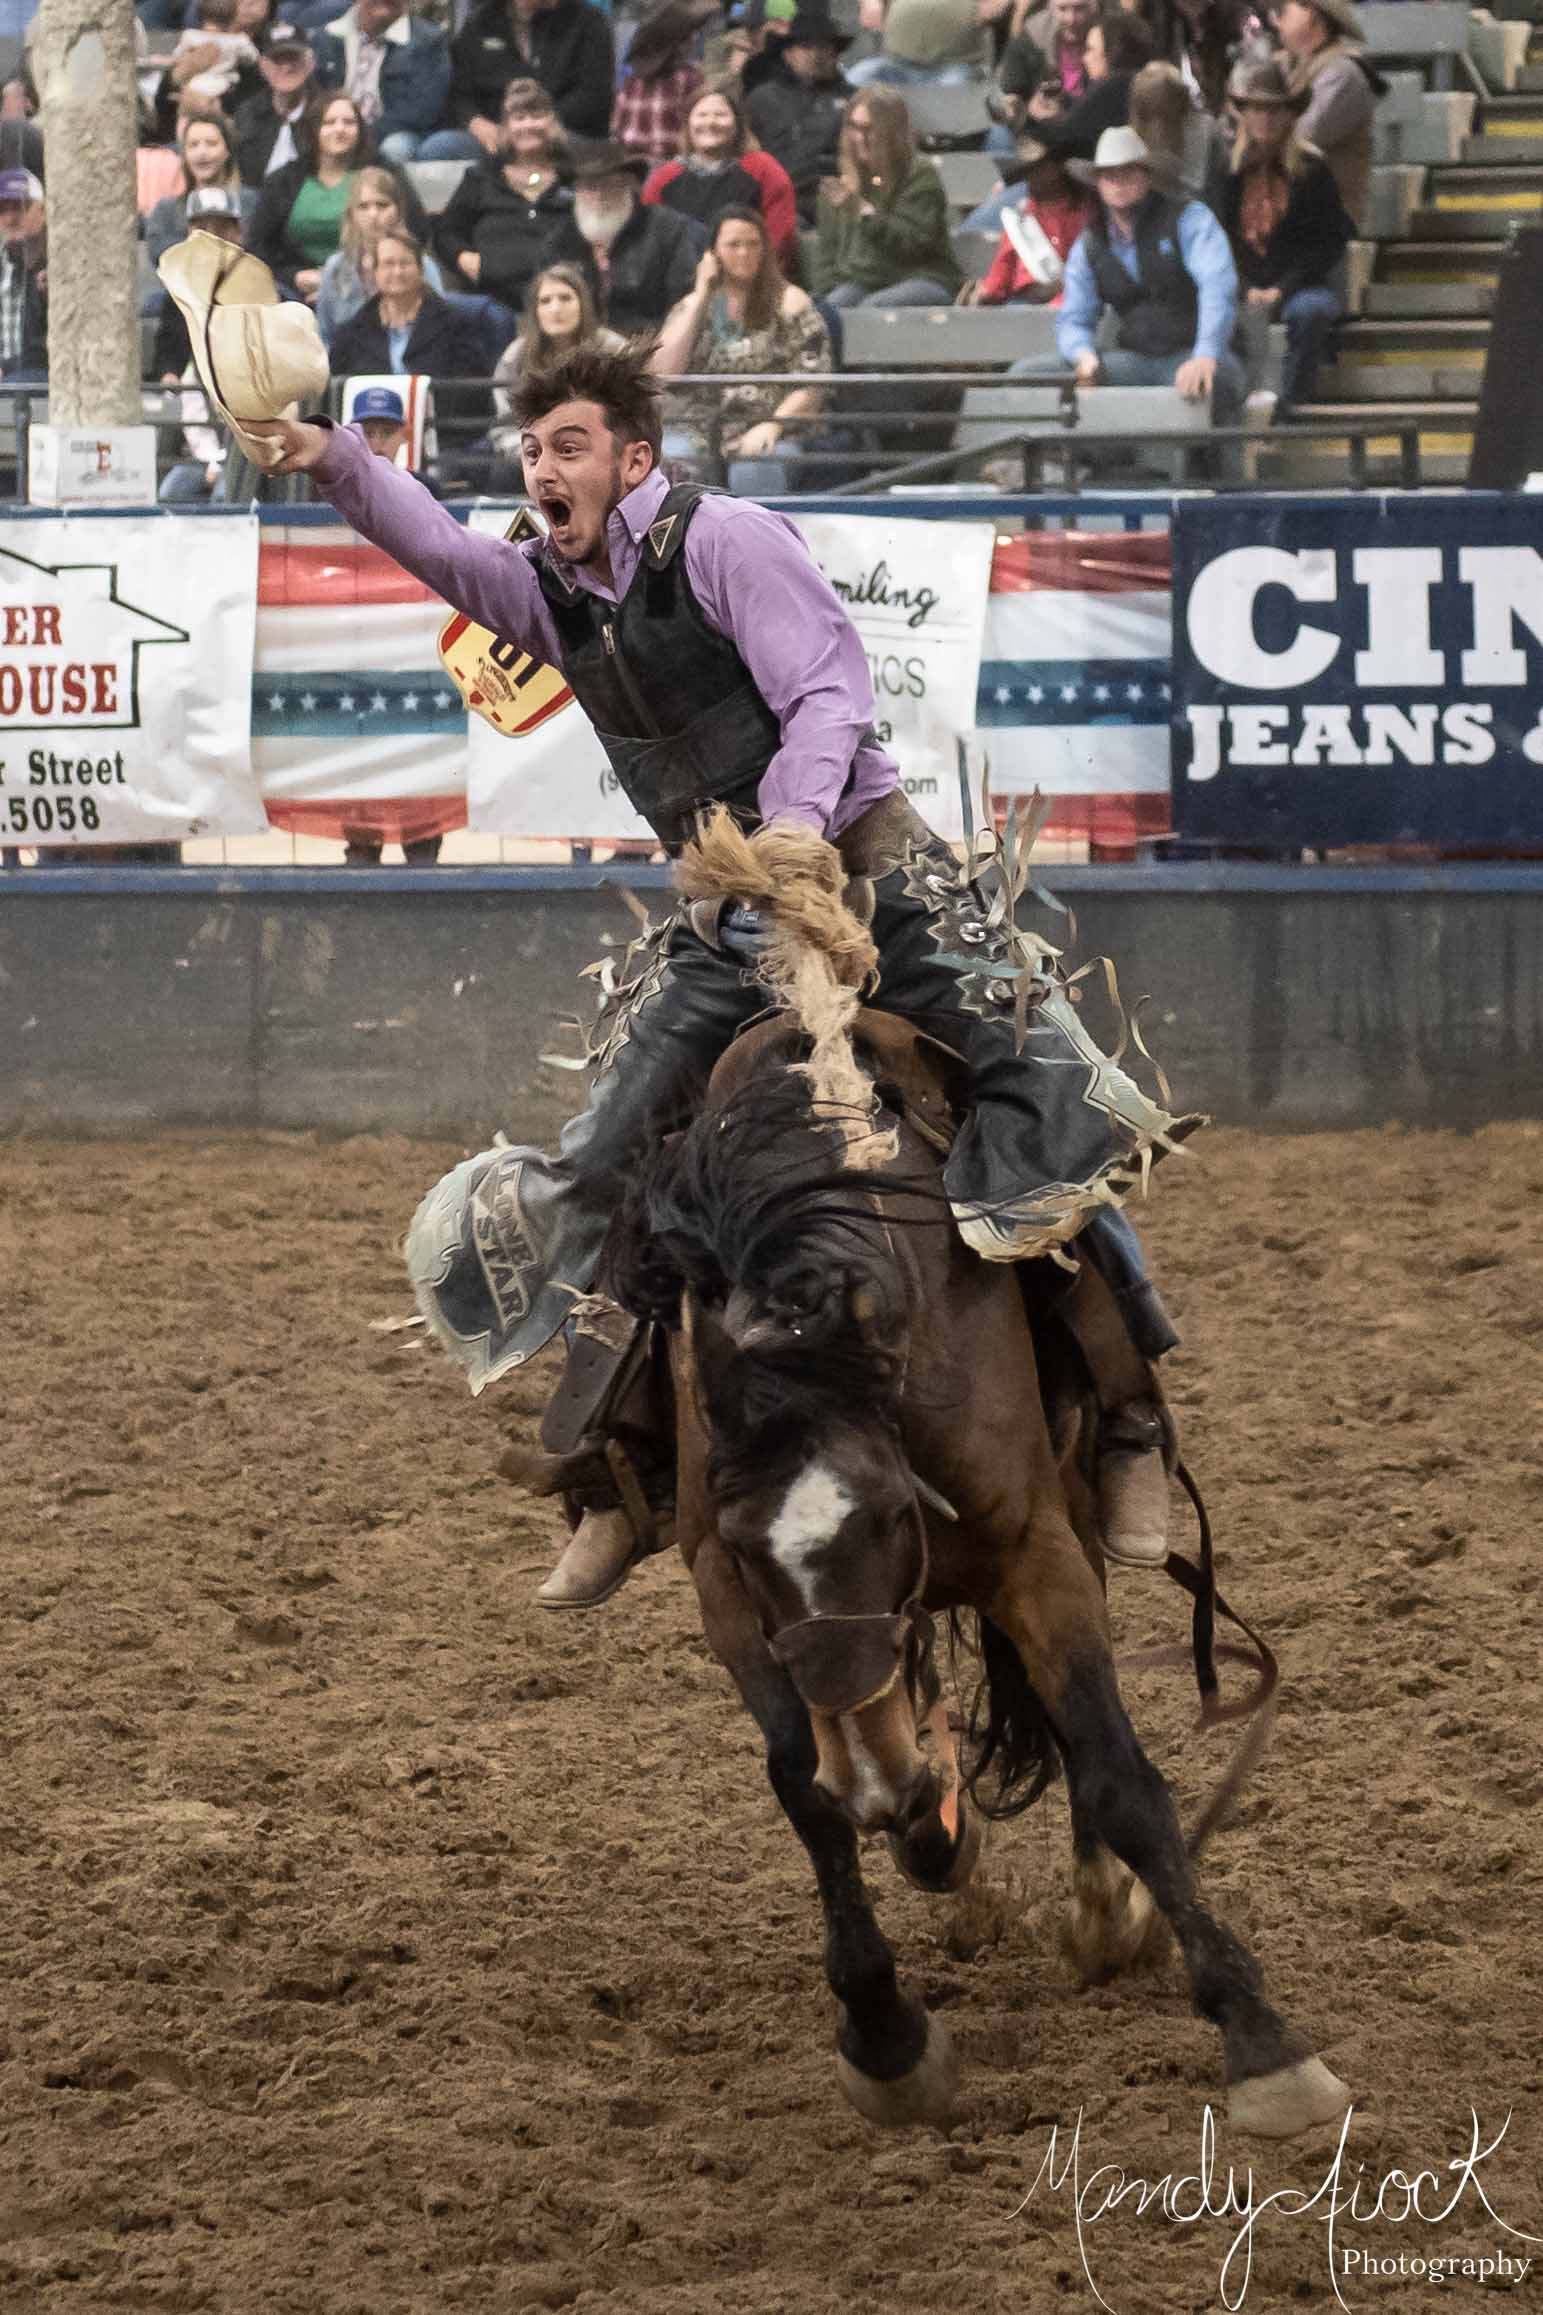 Photos from the 2018 Cinch United Finals Rodeo by Mandy Fiock Photography!